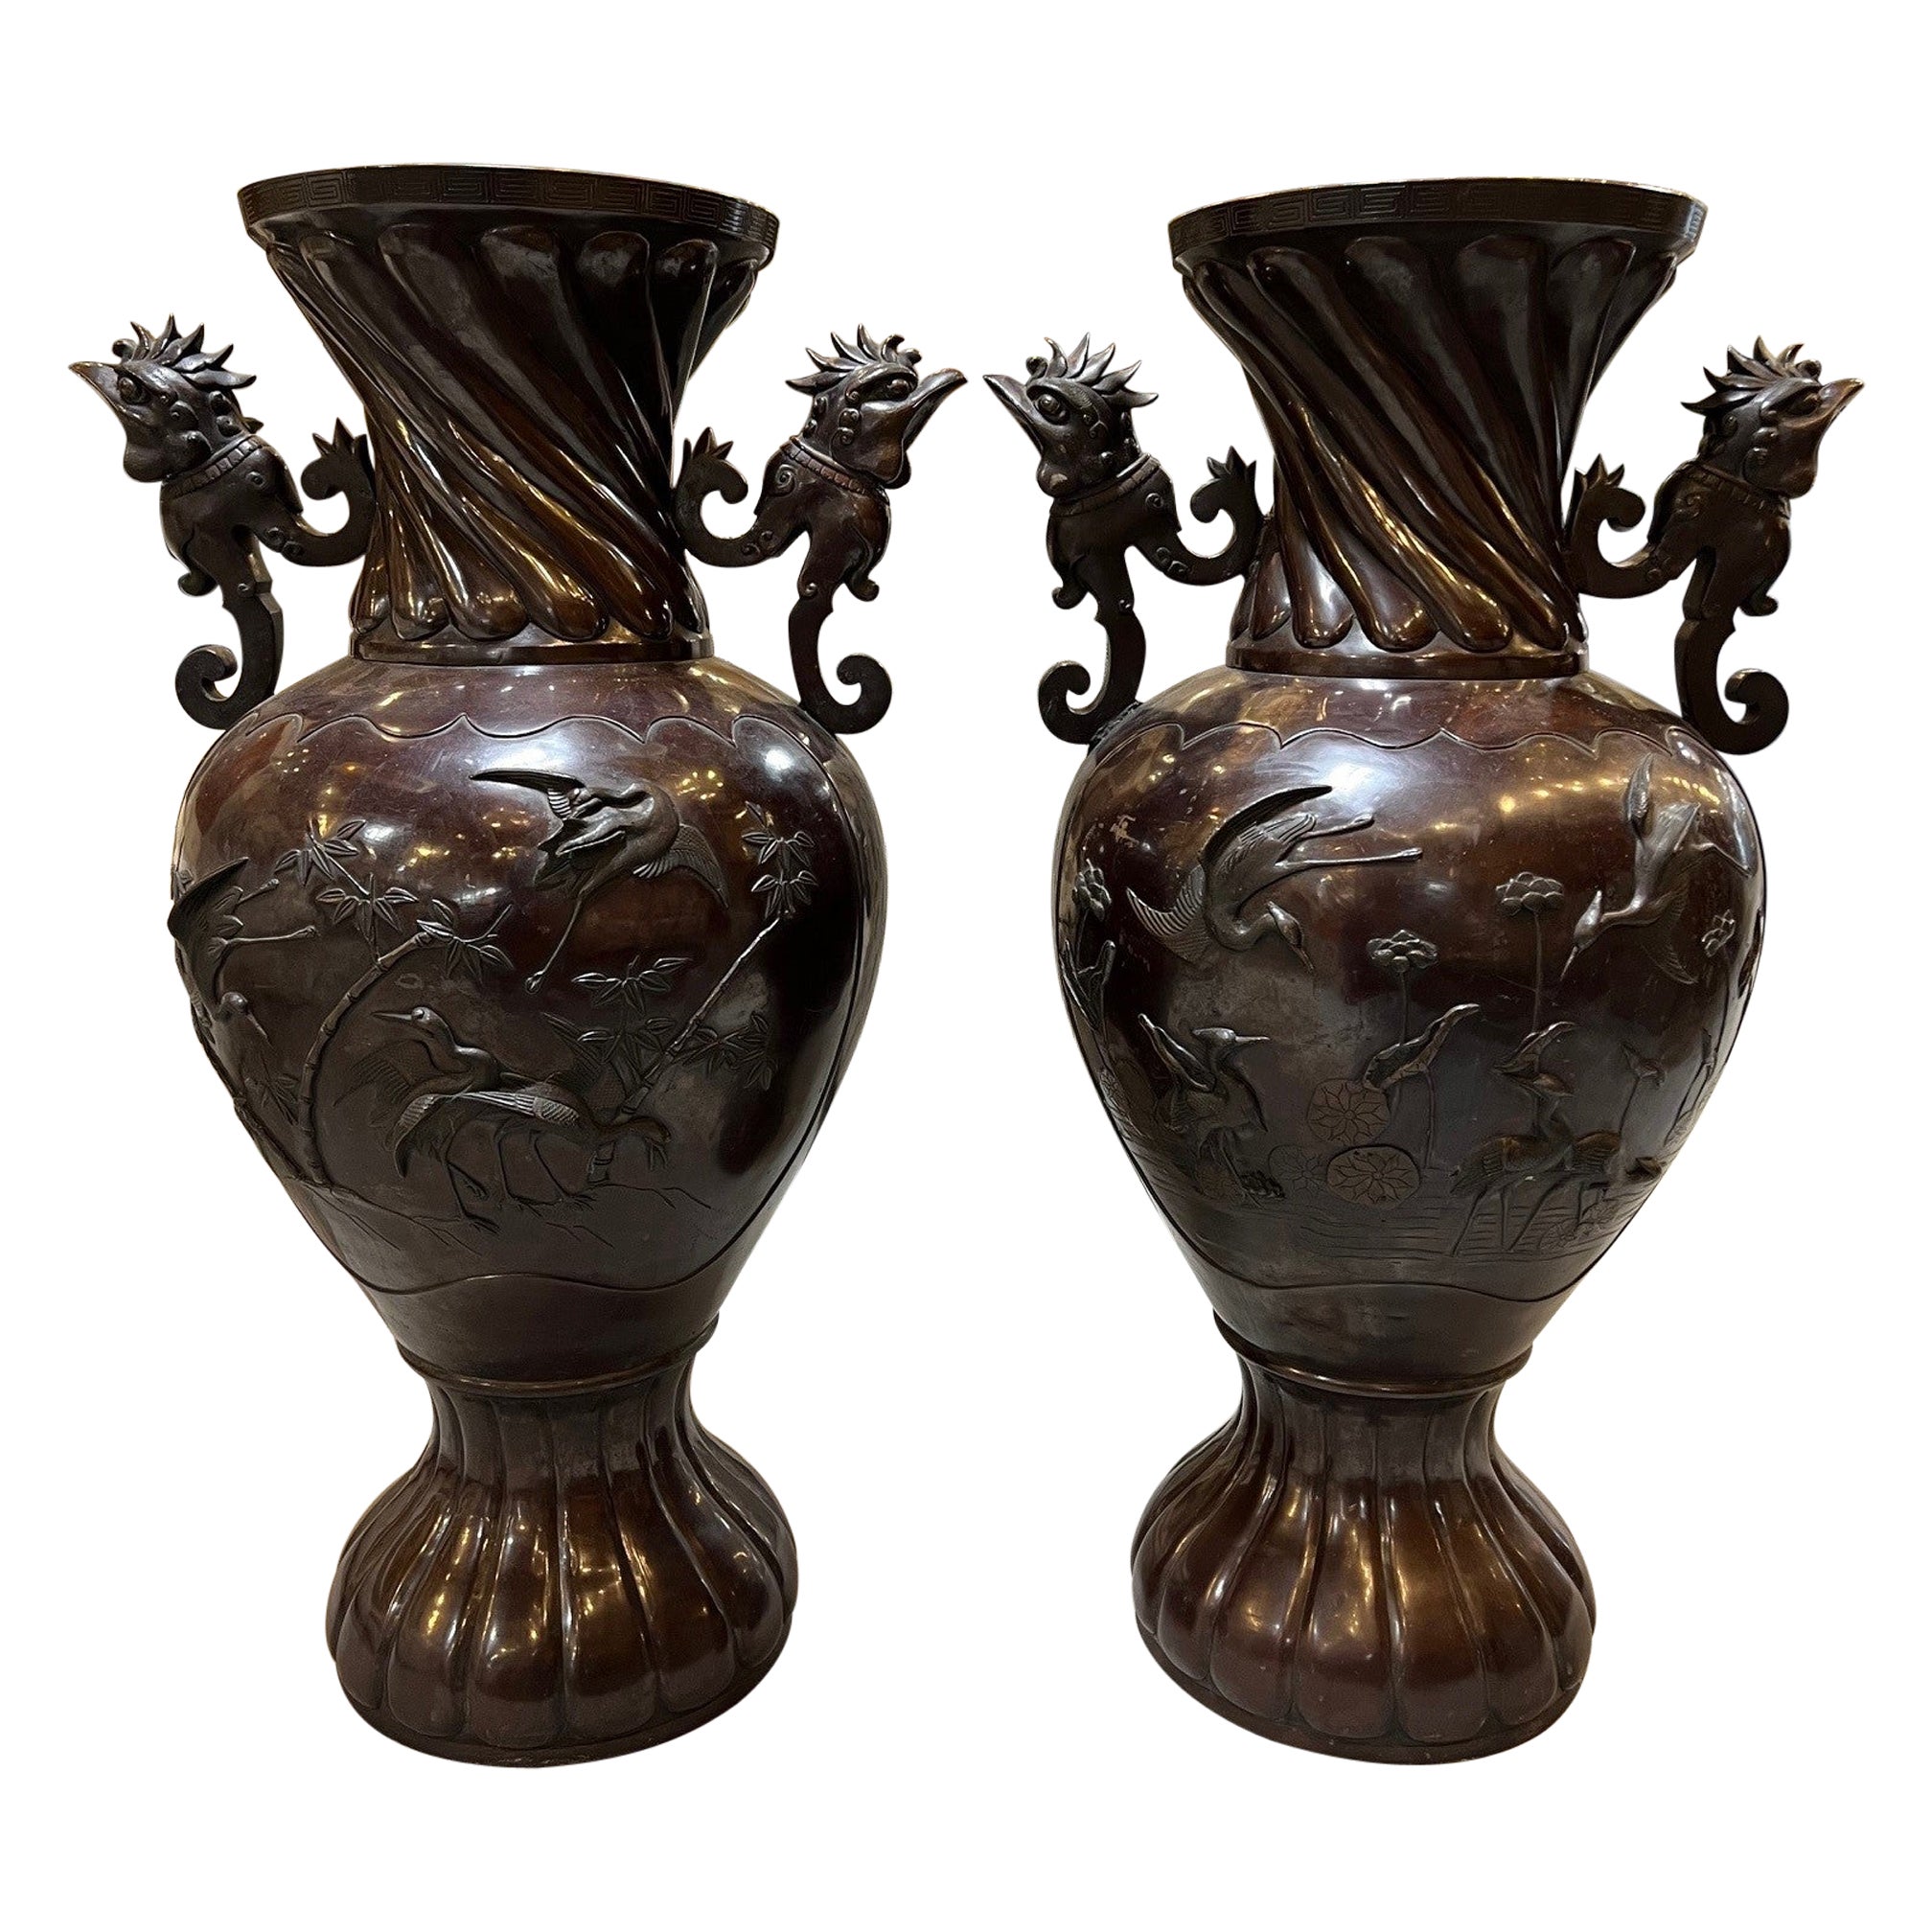 Vintage Pair of Large Japanese Bronze Urns with Cranes & Bamboo Trees  